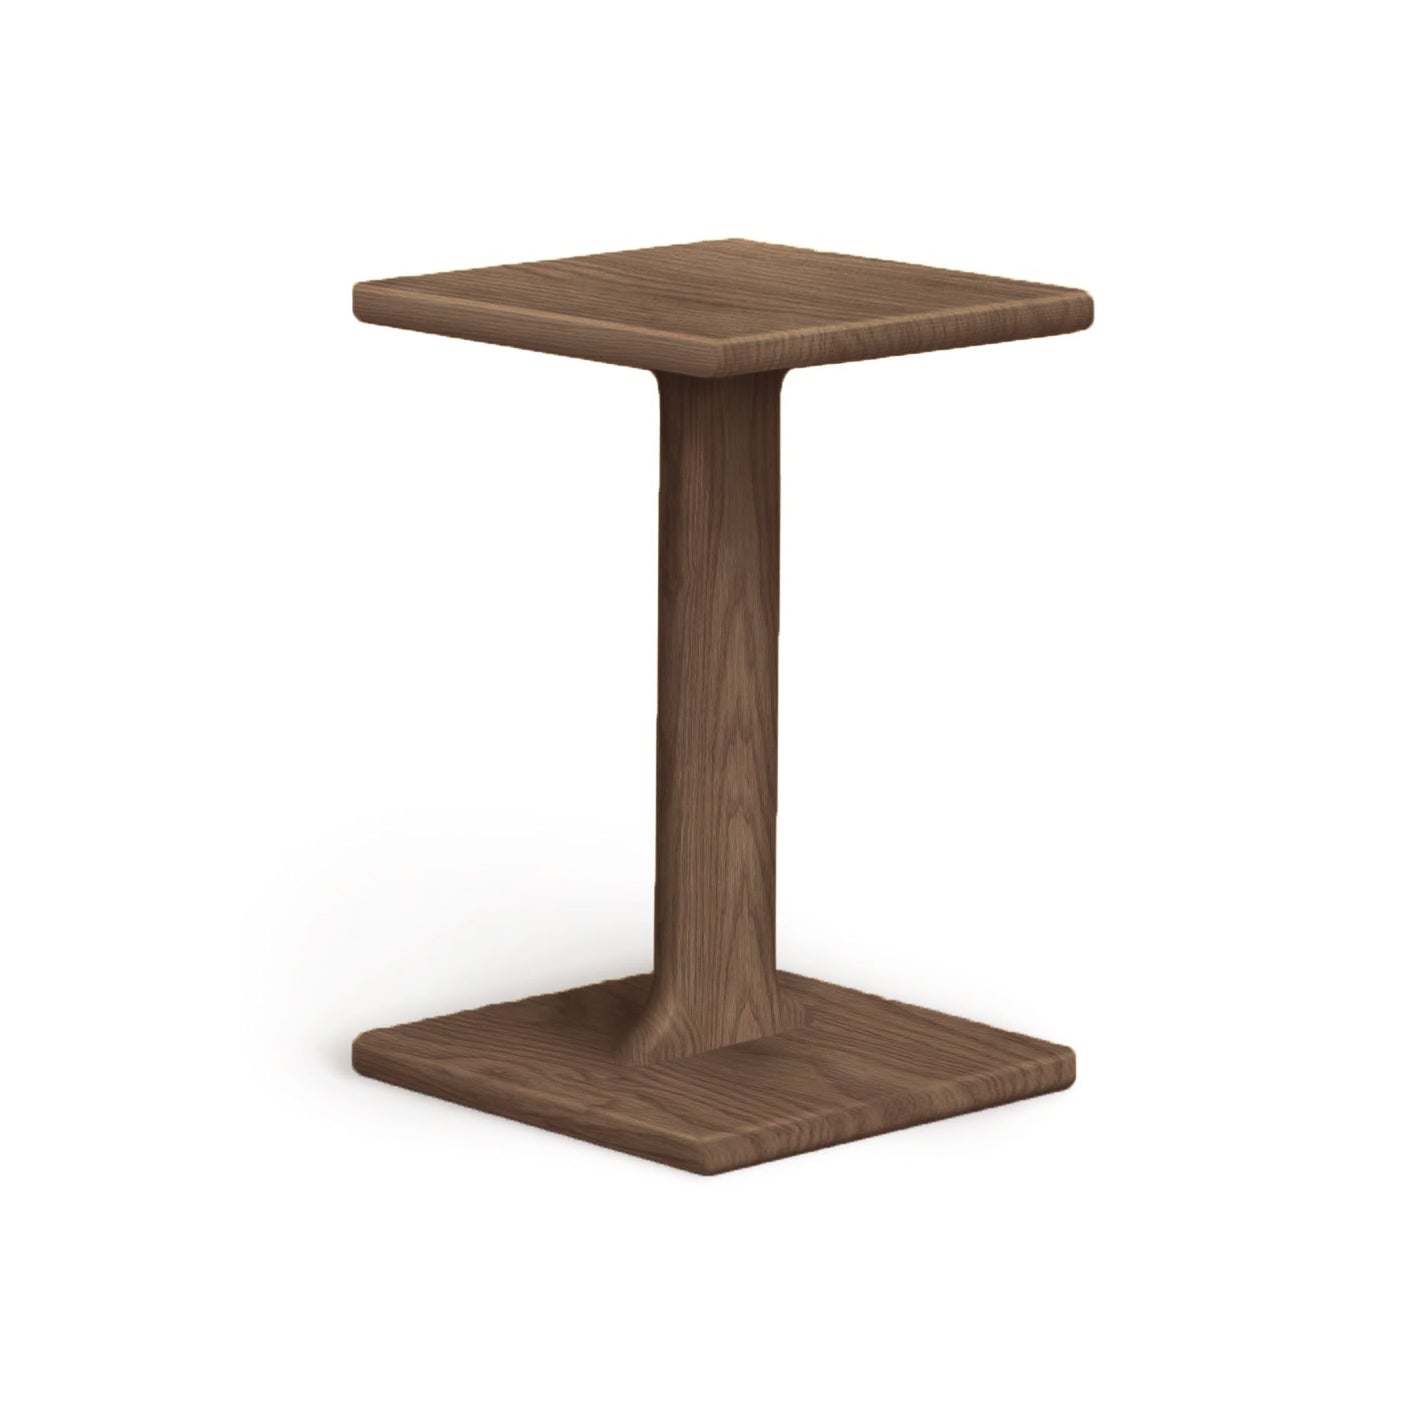 A solid Sierra Chair Table by Copeland Furniture with a square top and a sturdy base, isolated on a white background.